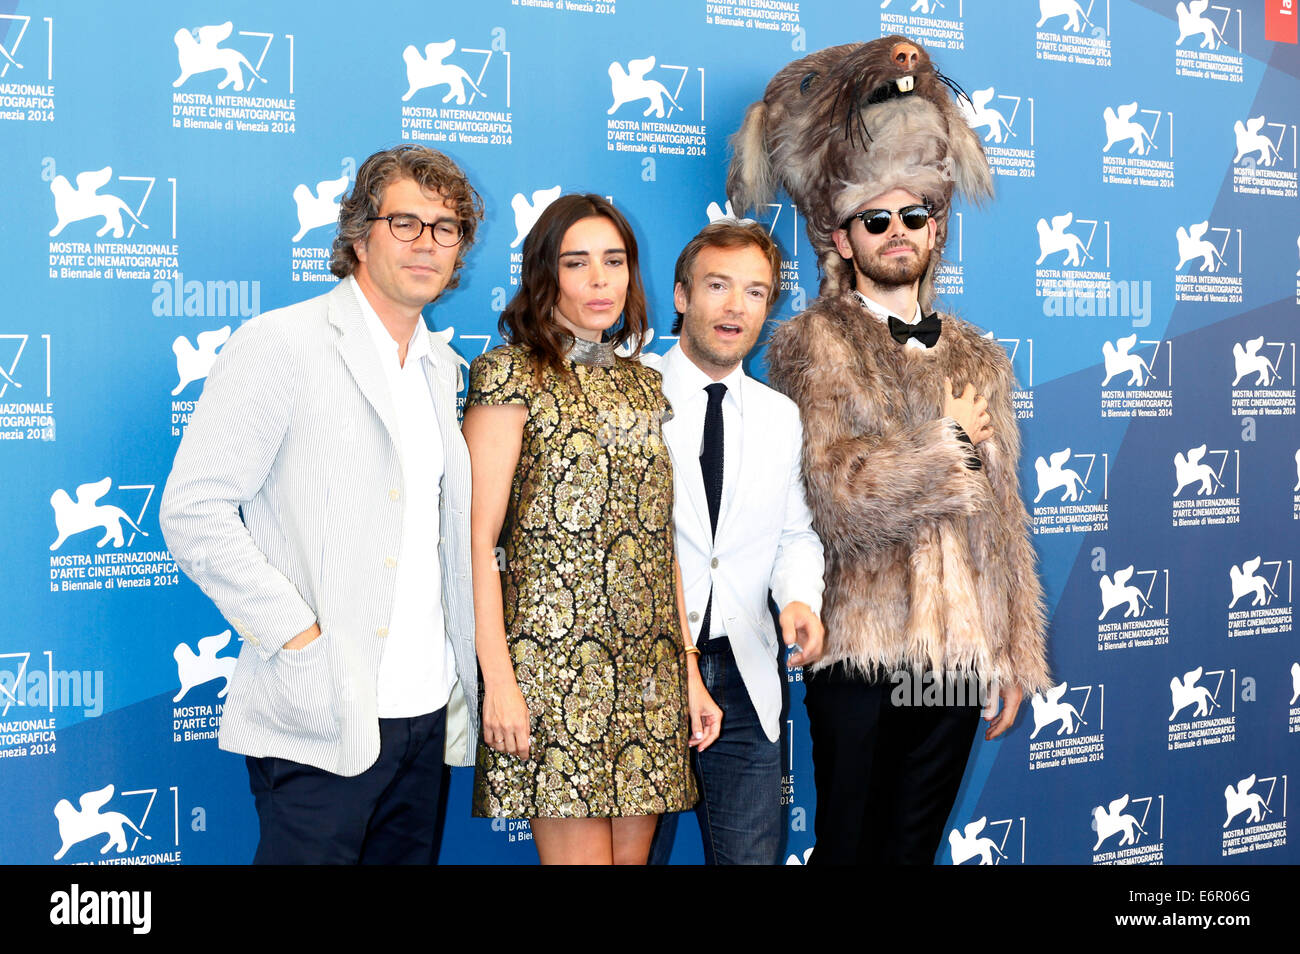 Gregory Bernard, Elodie Bouchez, Jonathan Lambert and The Rat during the 'Reality' photocall at the 71nd Venice International Film Festival on August 28, 2014./picture alliance Stock Photo